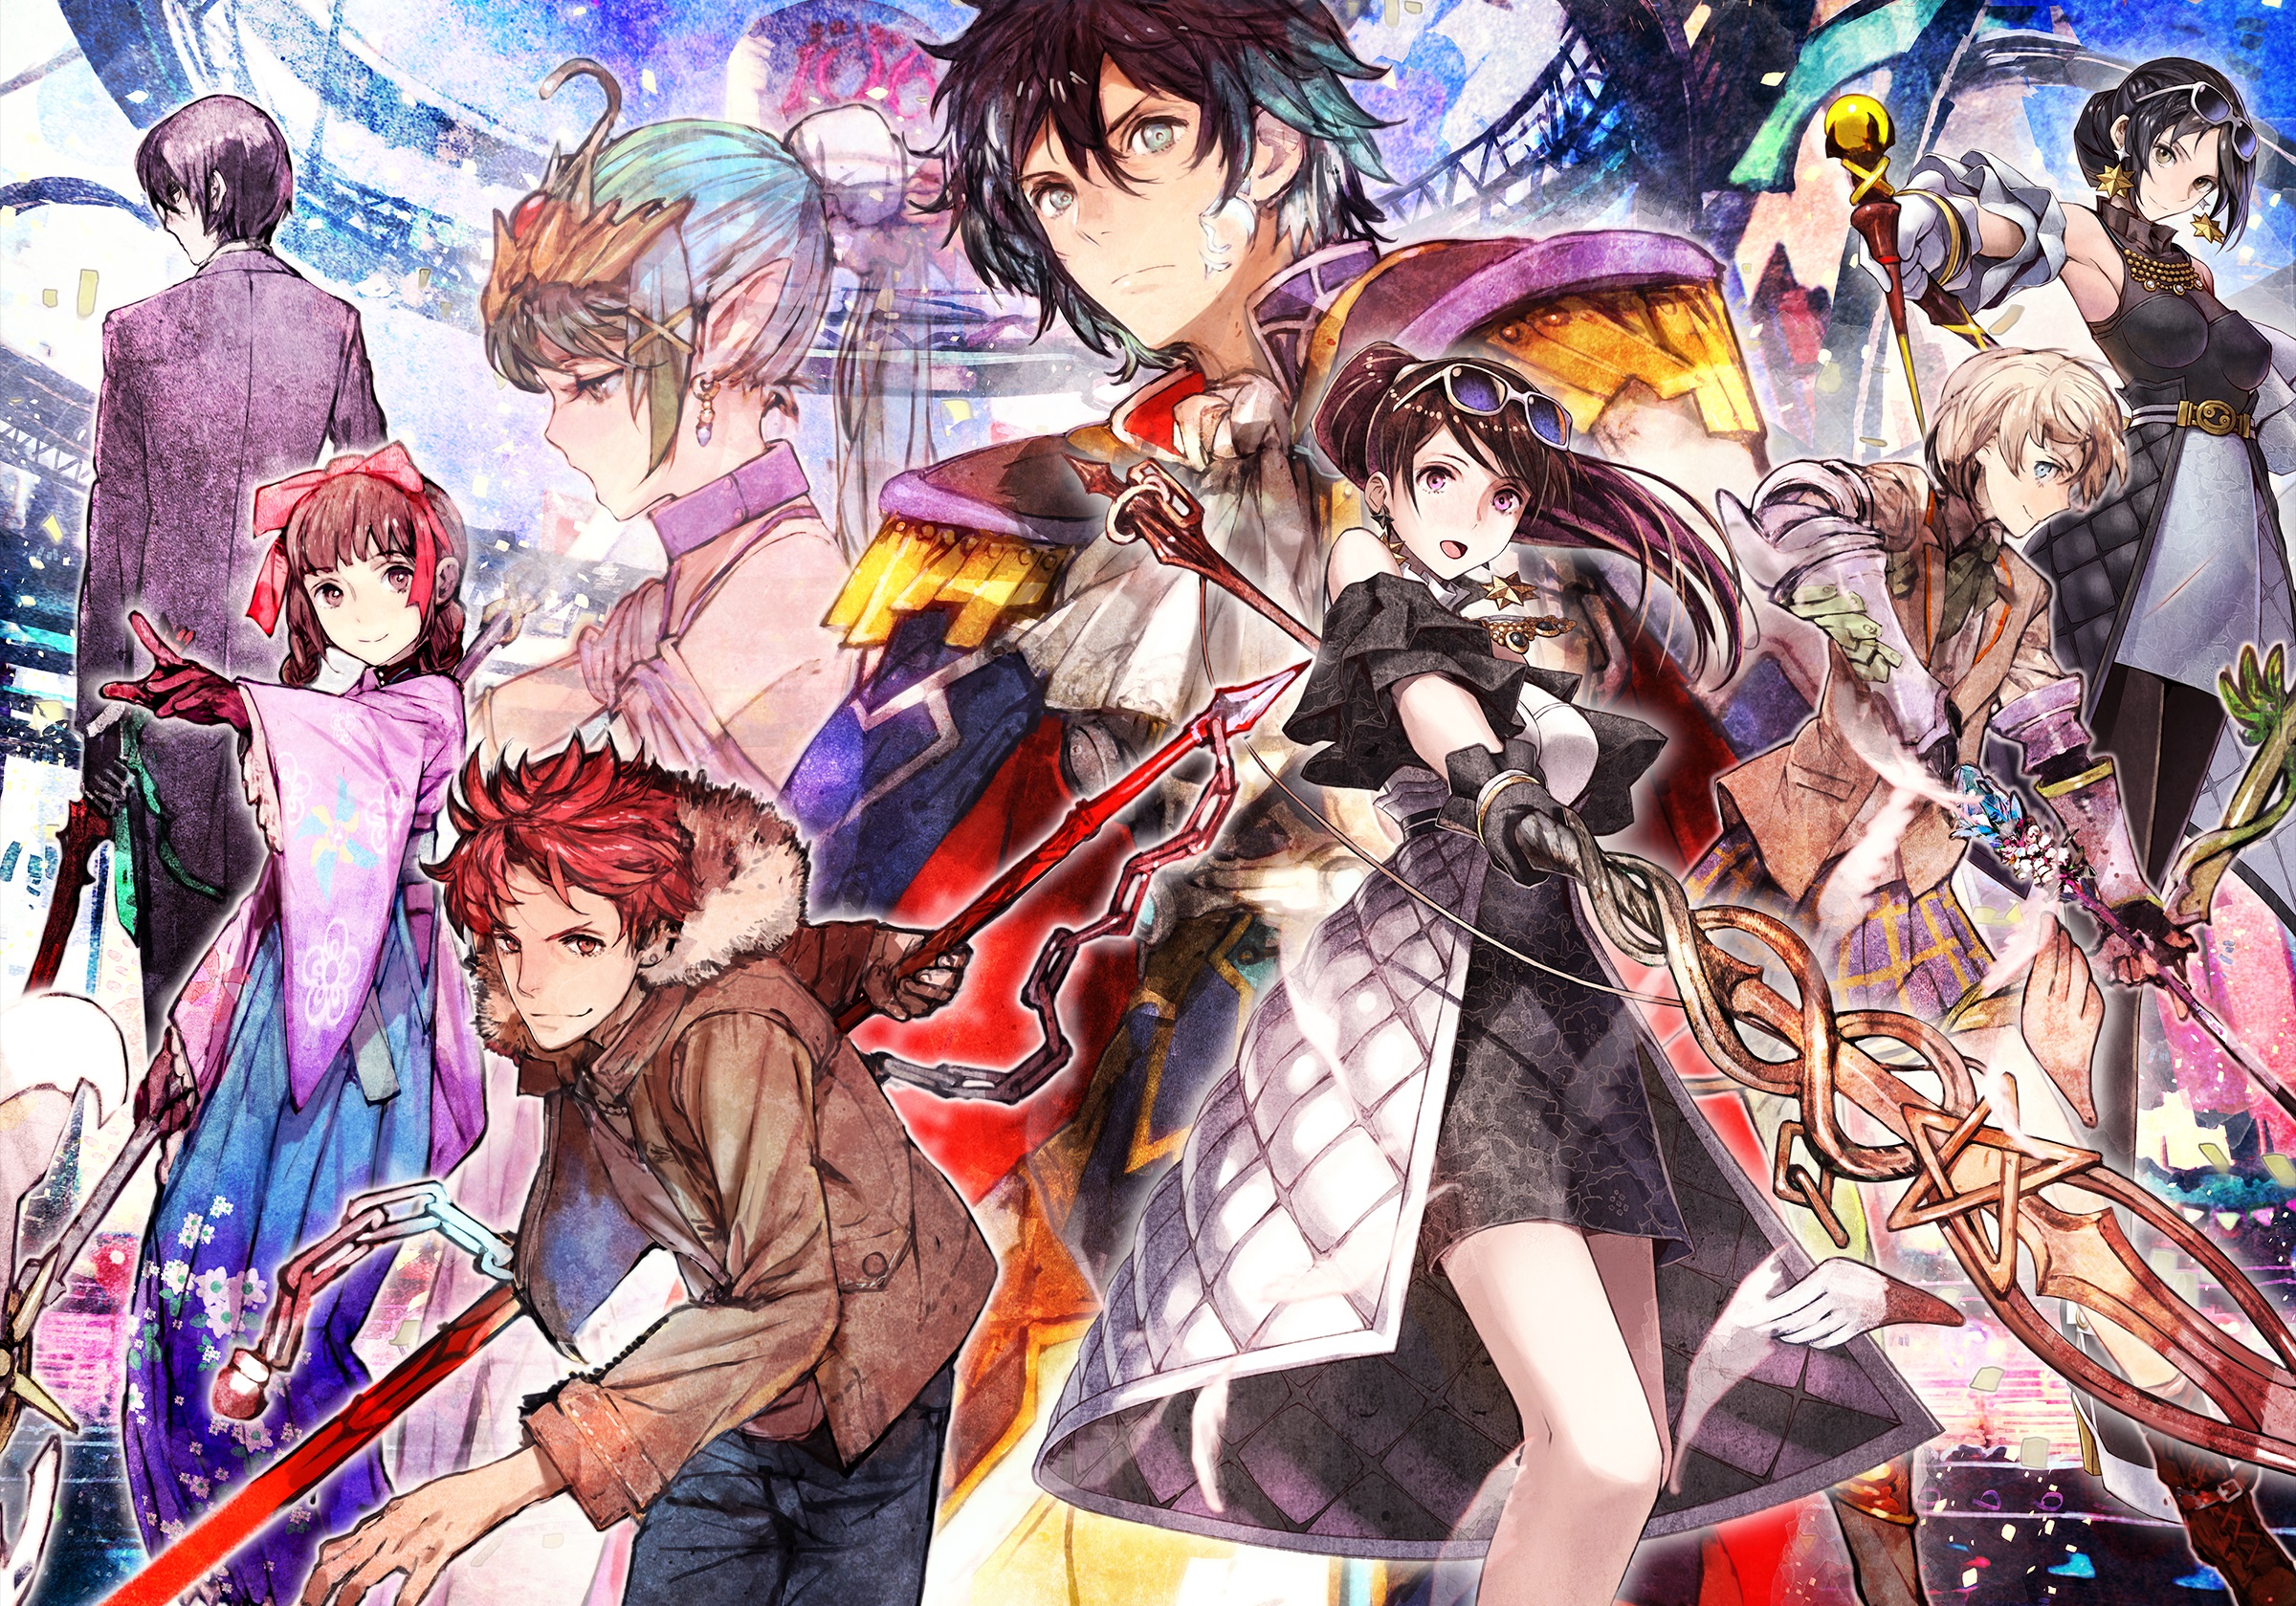 Tokyo Mirage Sessions #FE Encore: New Features Clarified